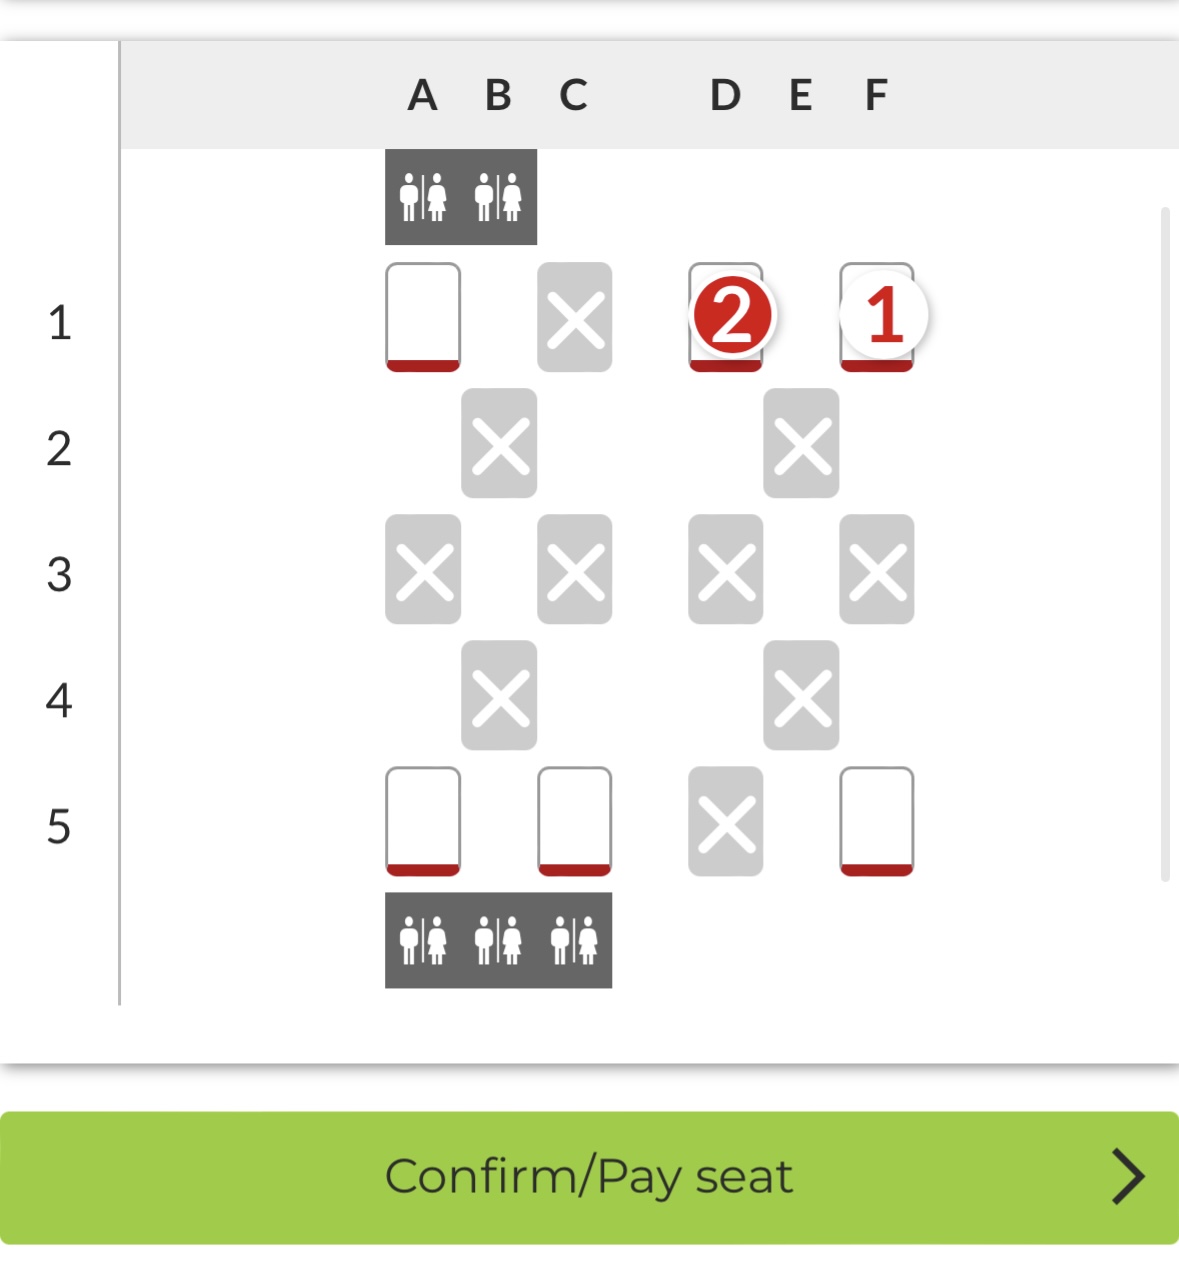 TAP Air Portugal A321LR - Business Cabin Seating